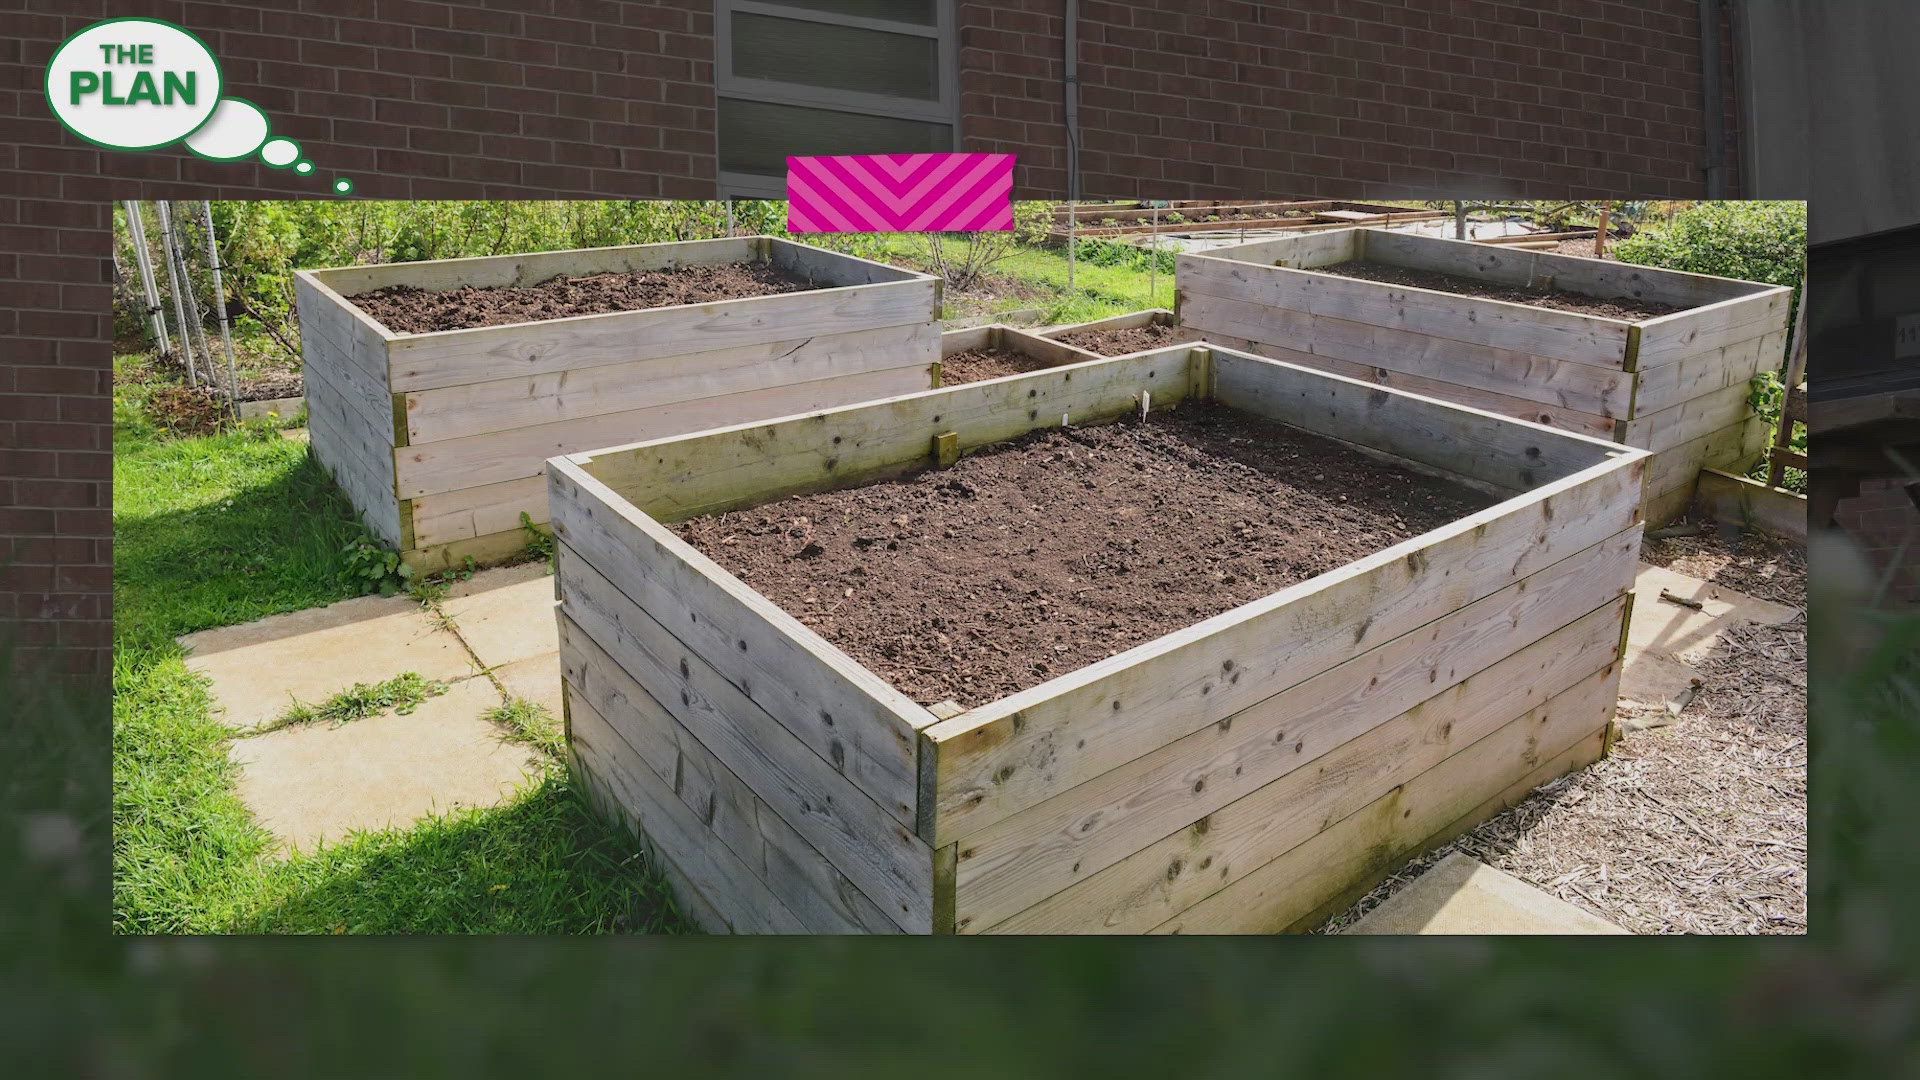 The Charles County school got an epic surprise after submitting a proposal to build planter boxes to increase the bee population and grow food for the community